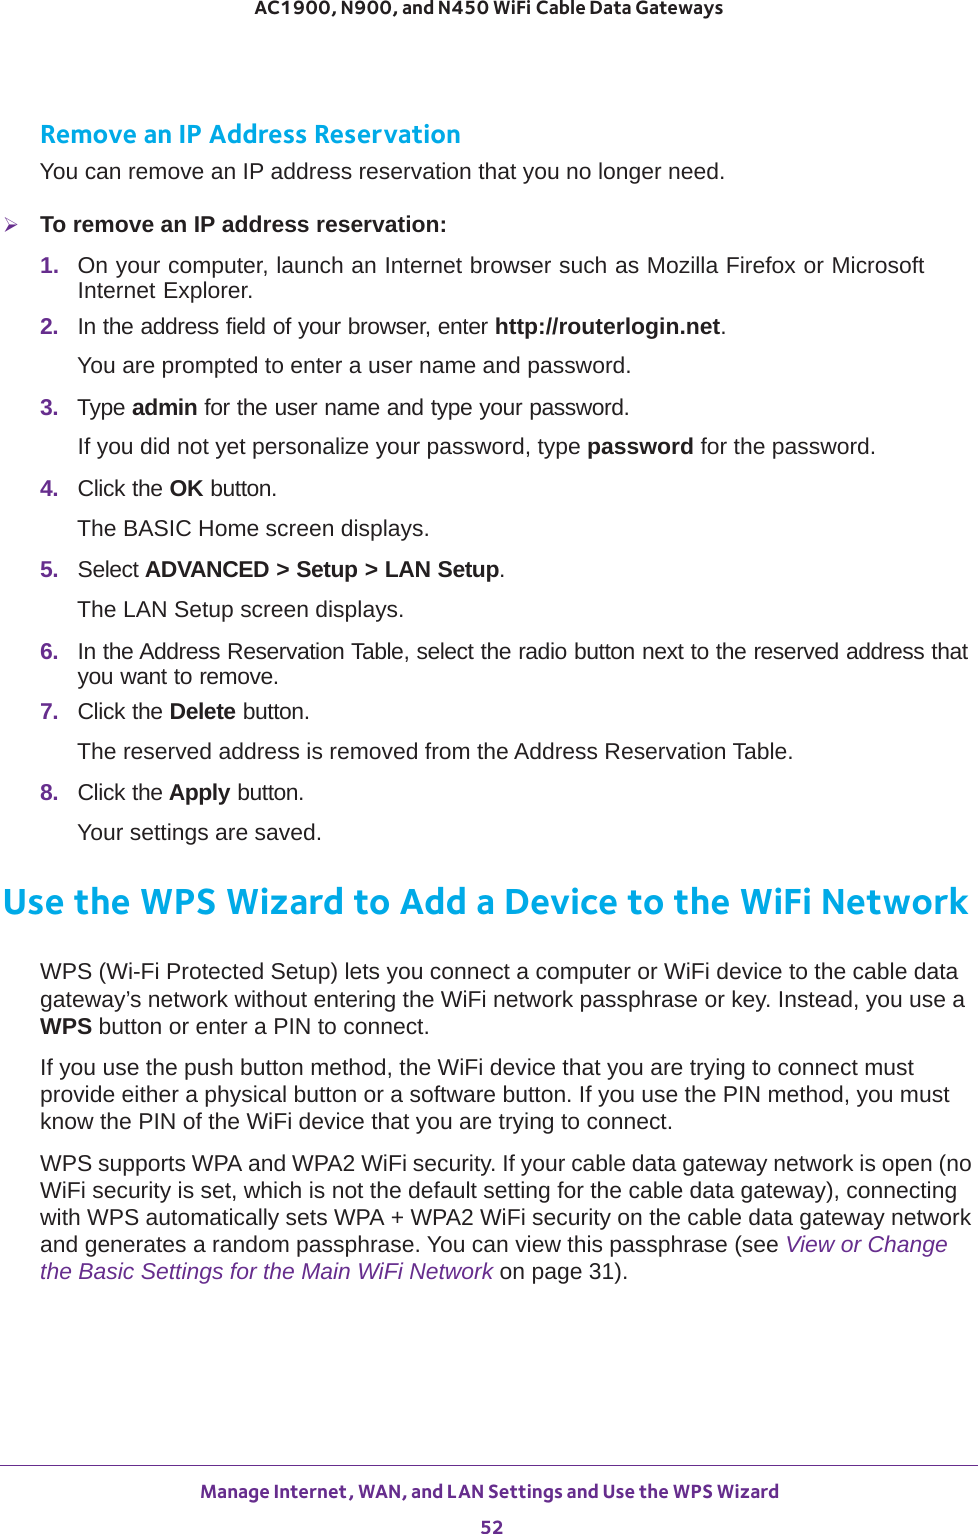 Manage Internet, WAN, and LAN Settings and Use the WPS Wizard 52AC1900, N900, and N450 WiFi Cable Data Gateways Remove an IP Address ReservationYou can remove an IP address reservation that you no longer need.To remove an IP address reservation:1.  On your computer, launch an Internet browser such as Mozilla Firefox or Microsoft Internet Explorer. 2.  In the address field of your browser, enter http://routerlogin.net.You are prompted to enter a user name and password.3.  Type admin for the user name and type your password.If you did not yet personalize your password, type password for the password.4.  Click the OK button. The BASIC Home screen displays.5.  Select ADVANCED &gt; Setup &gt; LAN Setup.The LAN Setup screen displays.6.  In the Address Reservation Table, select the radio button next to the reserved address that you want to remove.7.  Click the Delete button.The reserved address is removed from the Address Reservation Table.8.  Click the Apply button.Your settings are saved.Use the WPS Wizard to Add a Device to the WiFi NetworkWPS (Wi-Fi Protected Setup) lets you connect a computer or WiFi device to the cable data gateway’s network without entering the WiFi network passphrase or key. Instead, you use a WPS button or enter a PIN to connect.If you use the push button method, the WiFi device that you are trying to connect must provide either a physical button or a software button. If you use the PIN method, you must know the PIN of the WiFi device that you are trying to connect.WPS supports WPA and WPA2 WiFi security. If your cable data gateway network is open (no WiFi security is set, which is not the default setting for the cable data gateway), connecting with WPS automatically sets WPA + WPA2 WiFi security on the cable data gateway network and generates a random passphrase. You can view this passphrase (see View or Change the Basic Settings for the Main WiFi Network on page  31).